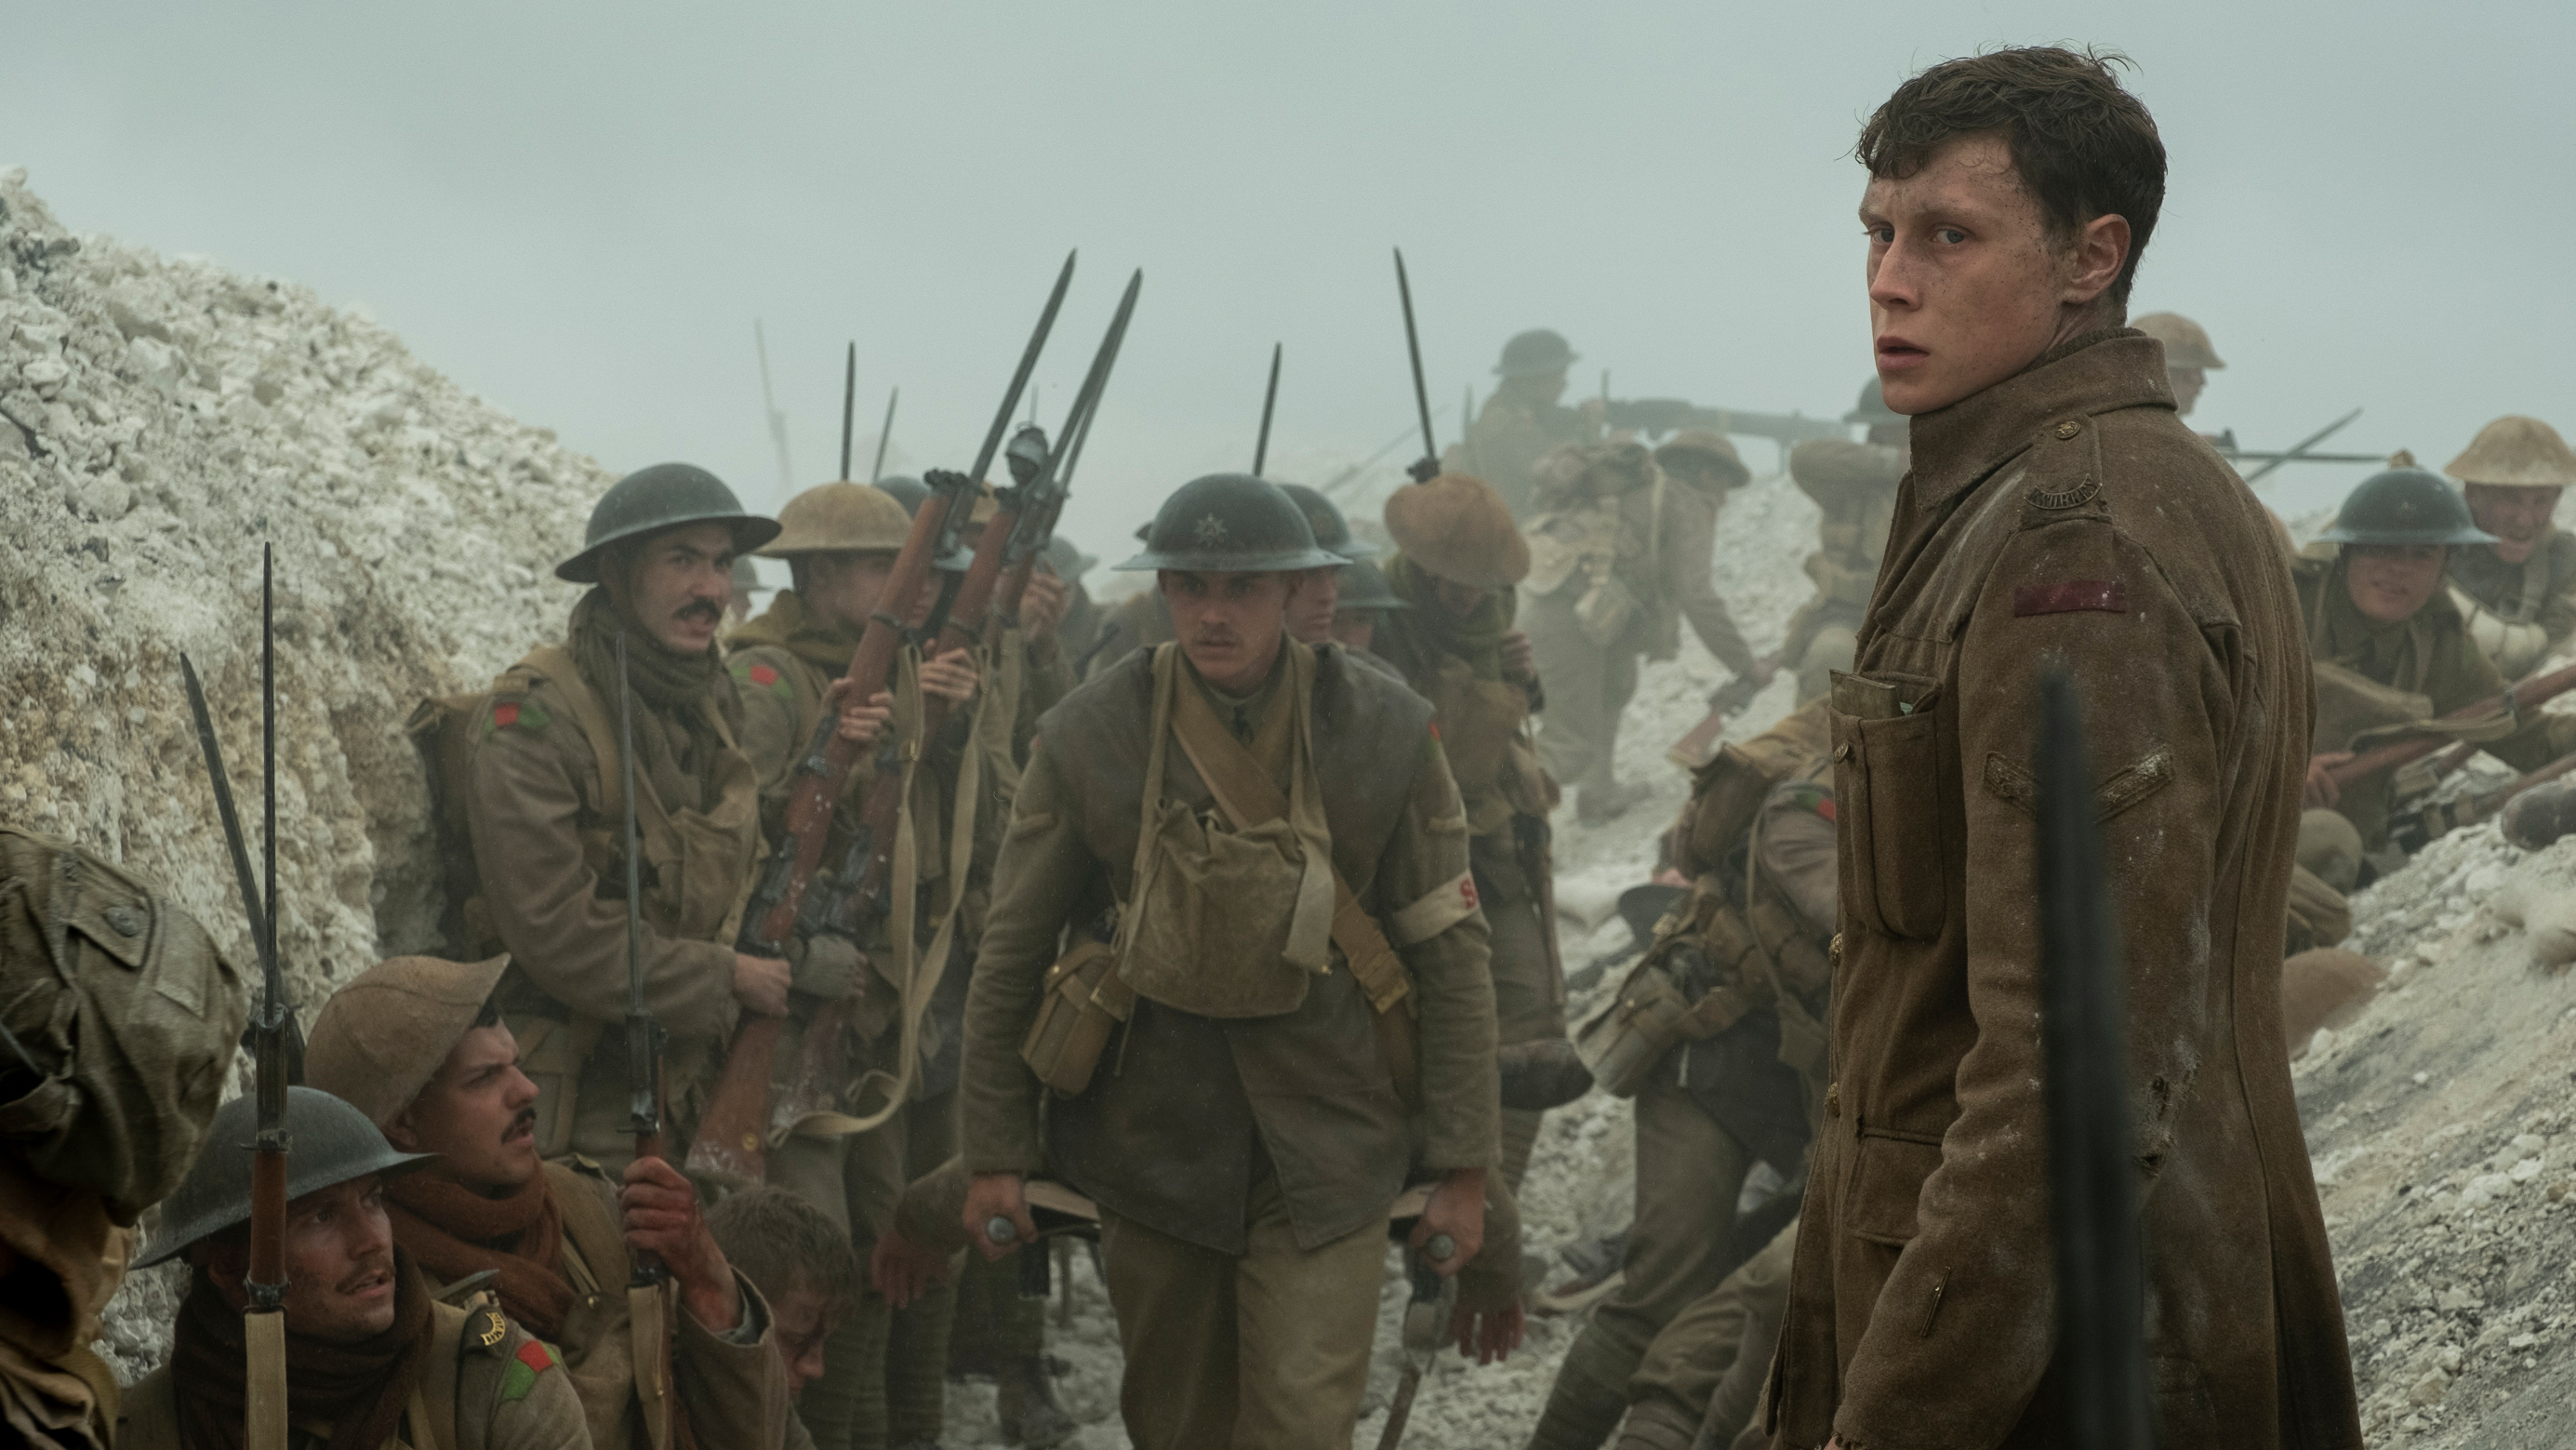 Will ‘1917’ Get Box Office Boost After Golden Globes Wins? - variety.com